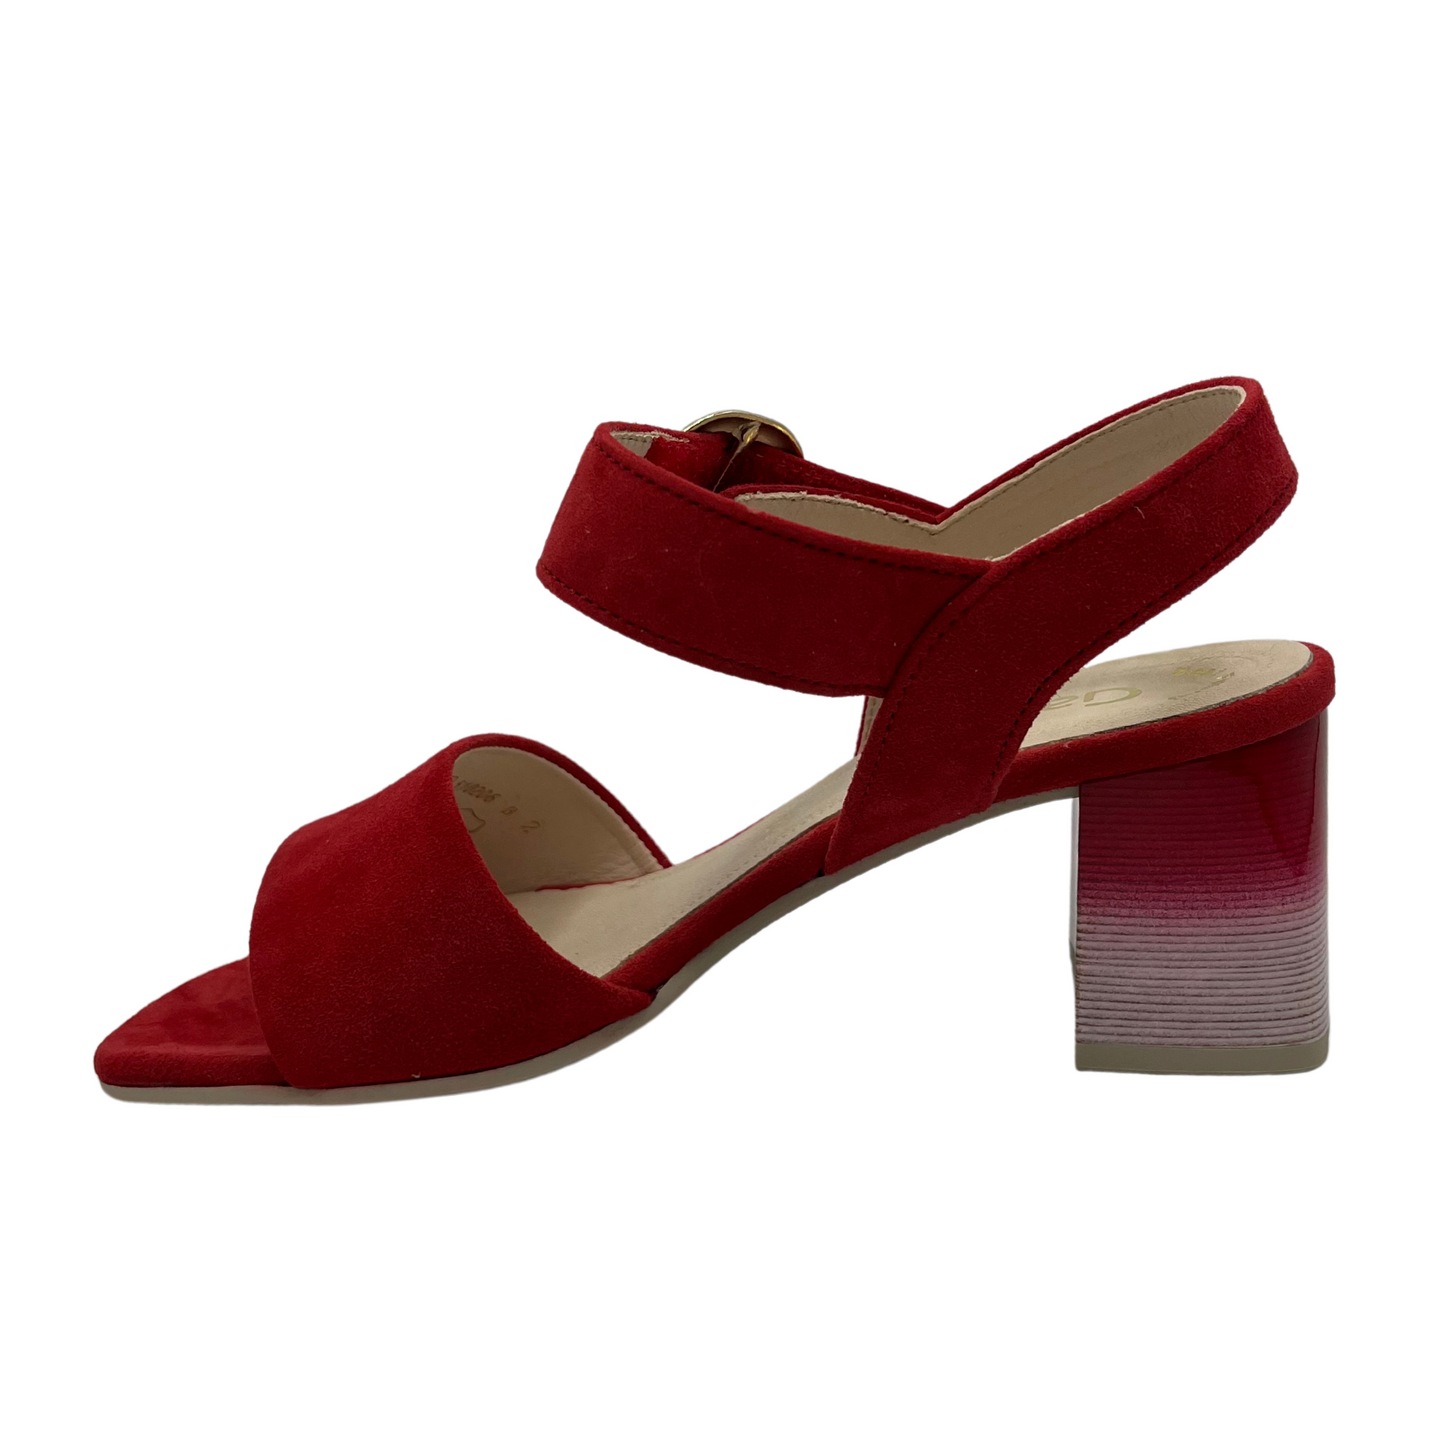 Left facing view of red high heeled sandal with soft square toe and silver buckle on the strap